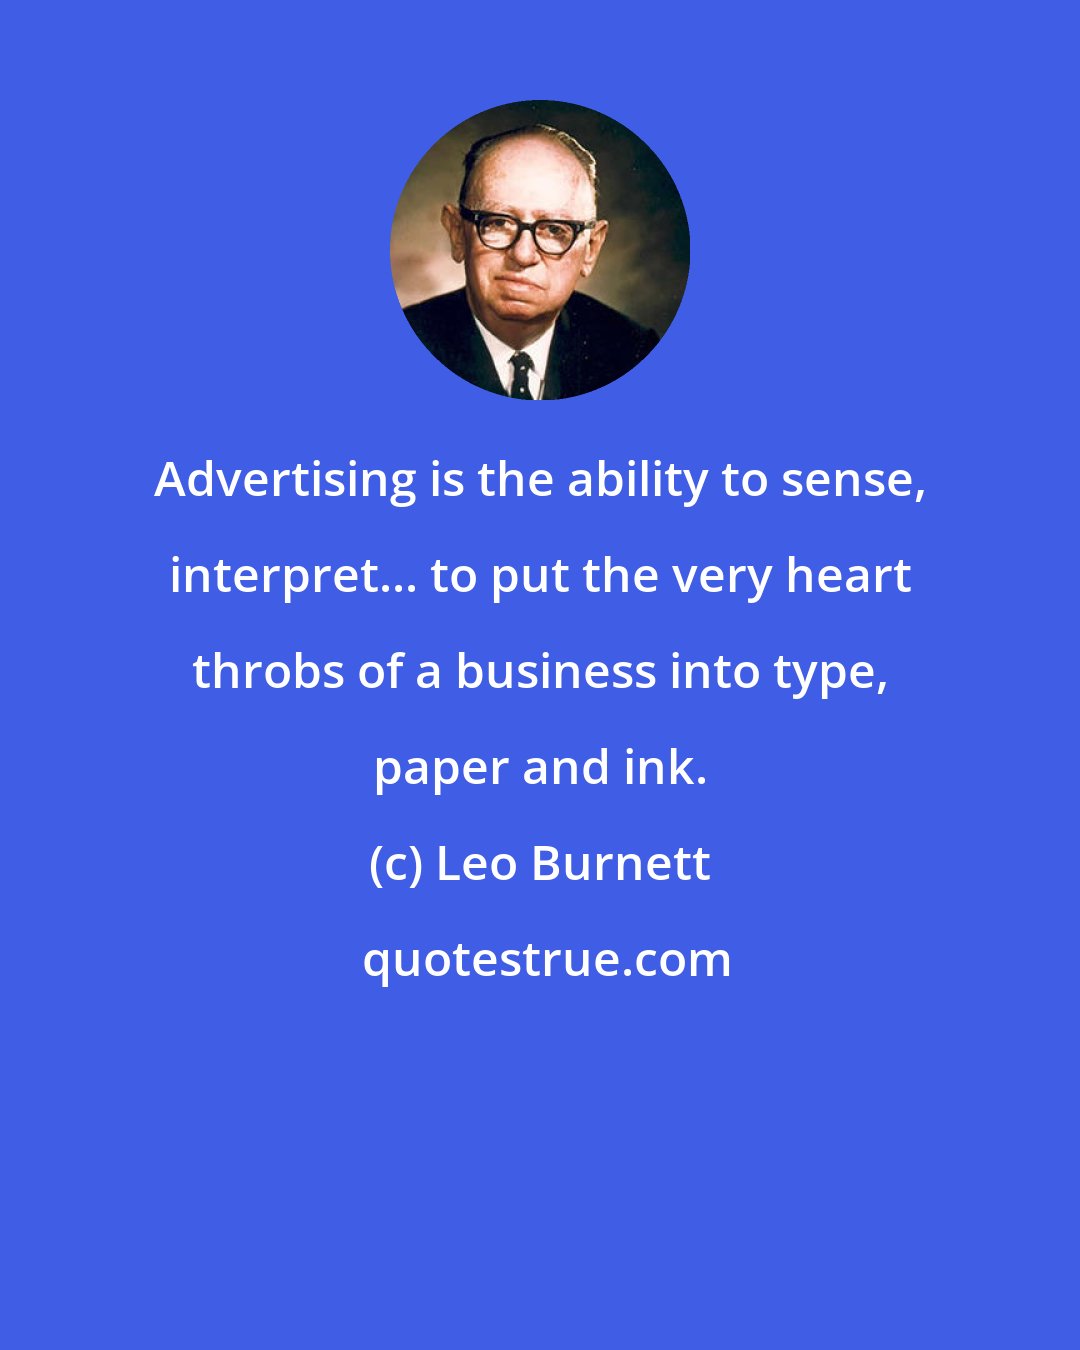 Leo Burnett: Advertising is the ability to sense, interpret... to put the very heart throbs of a business into type, paper and ink.